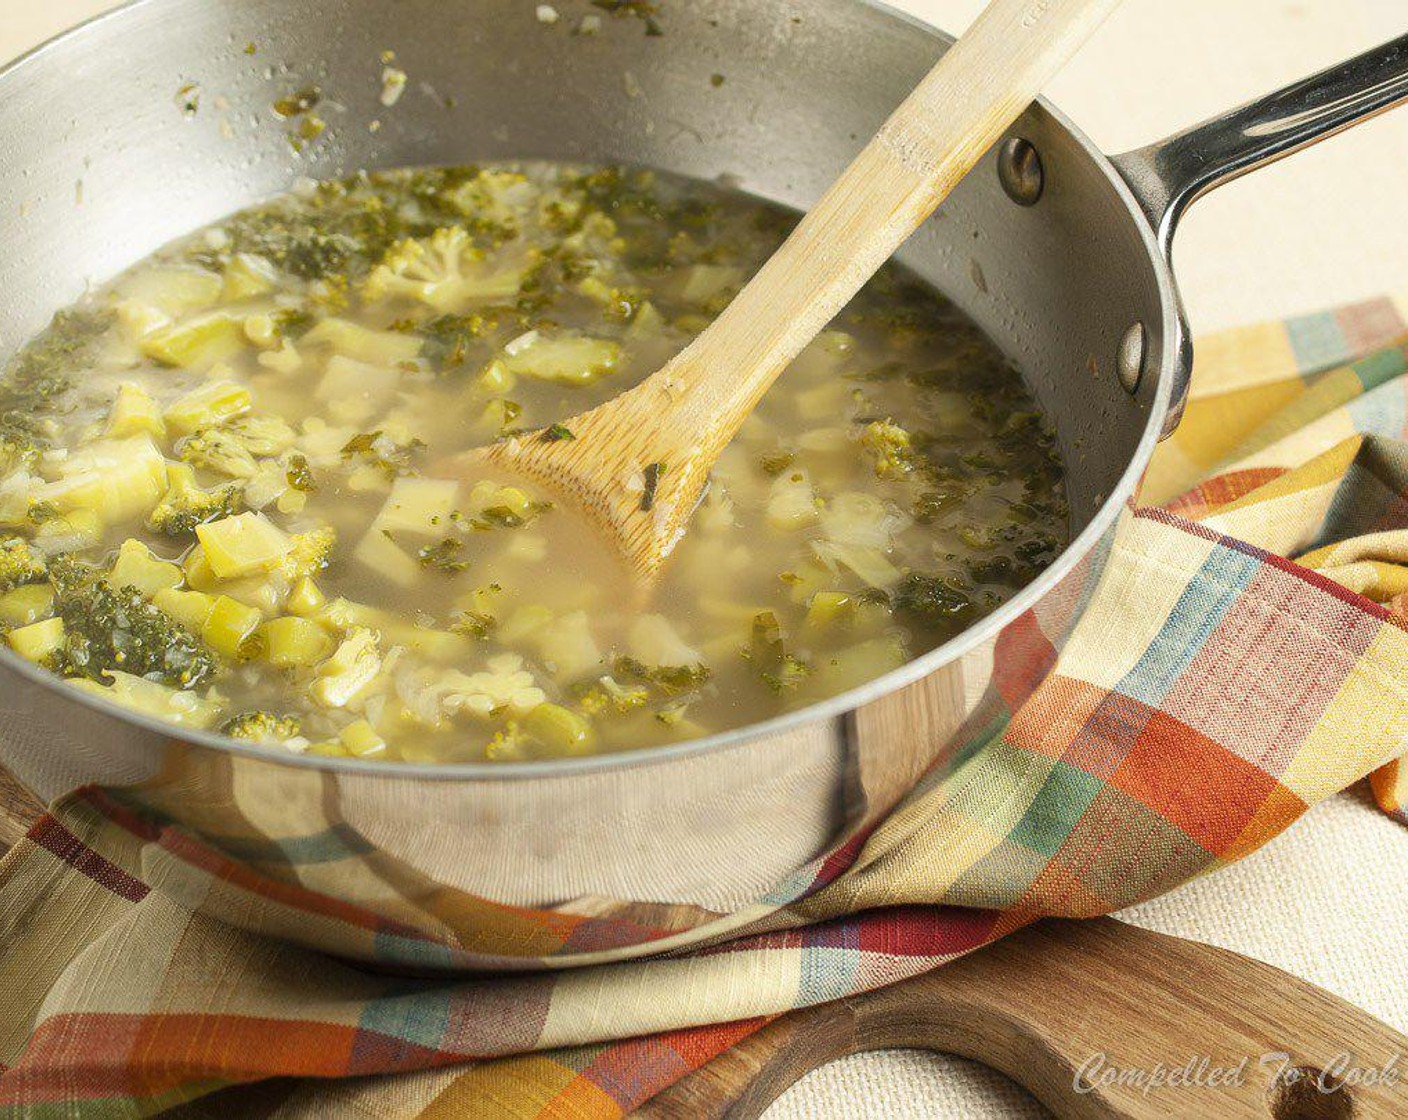 step 4 Add chopped broccoli, Chicken Broth (3 cups) and Fresh Oregano (1 Tbsp). Bring to a simmer, cover and cook until very tender, 15-20 minutes.